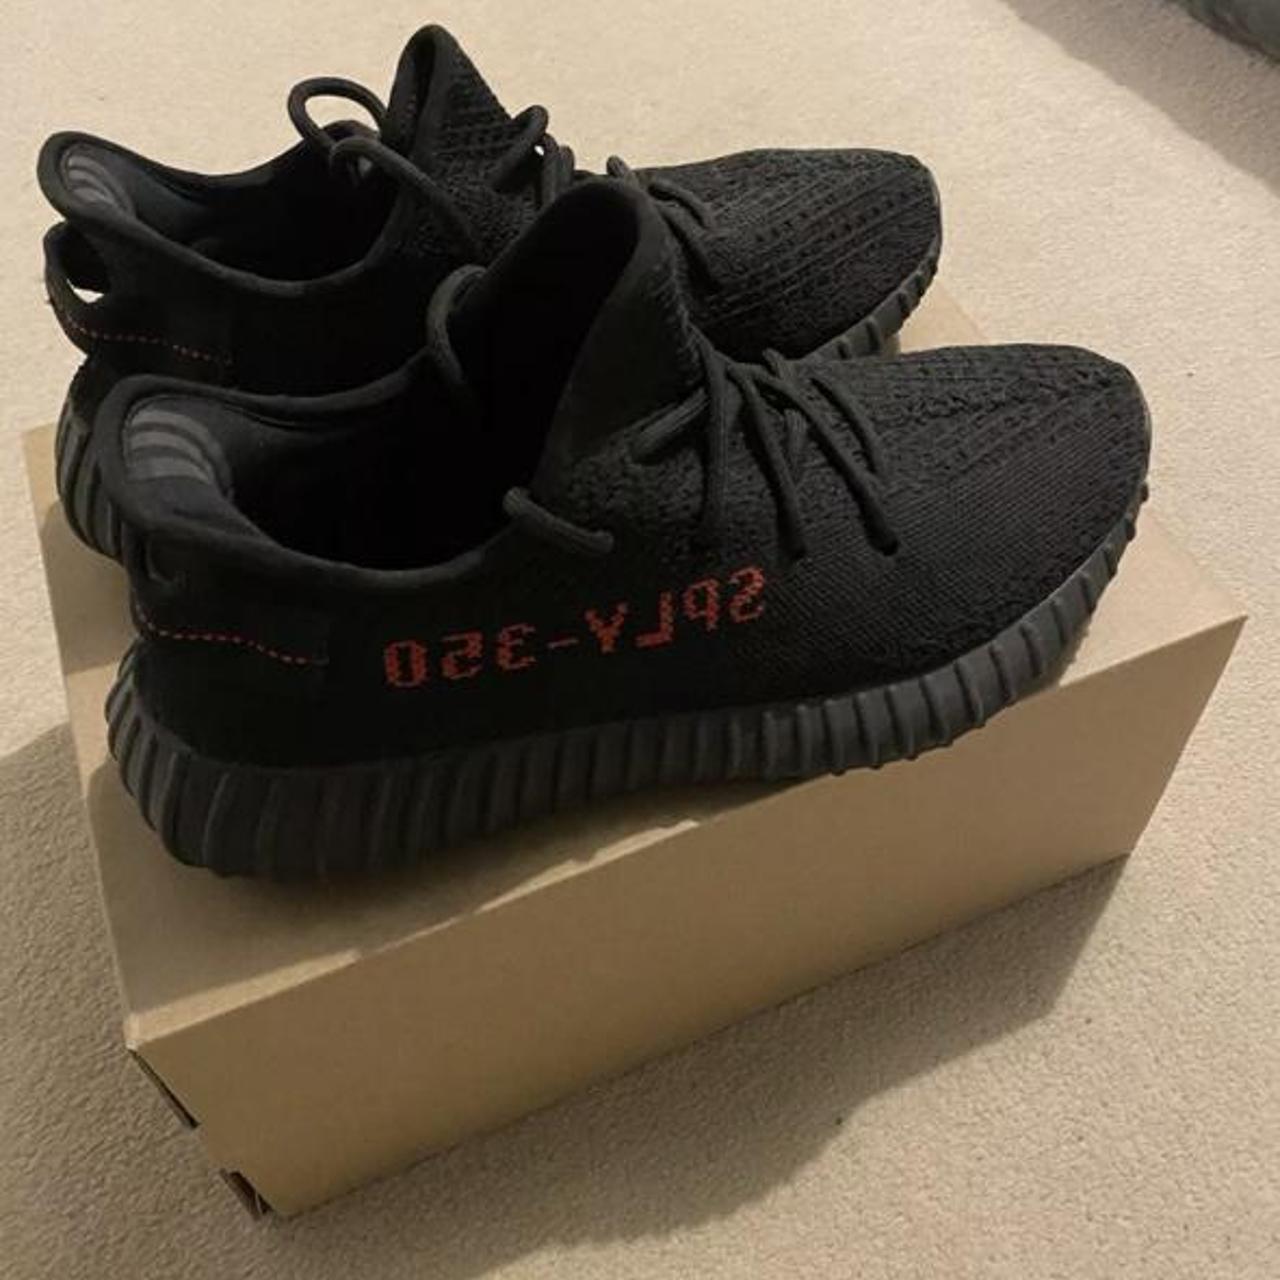 Yeezy Bred 350 V2 Only worn couple of times,... - Depop